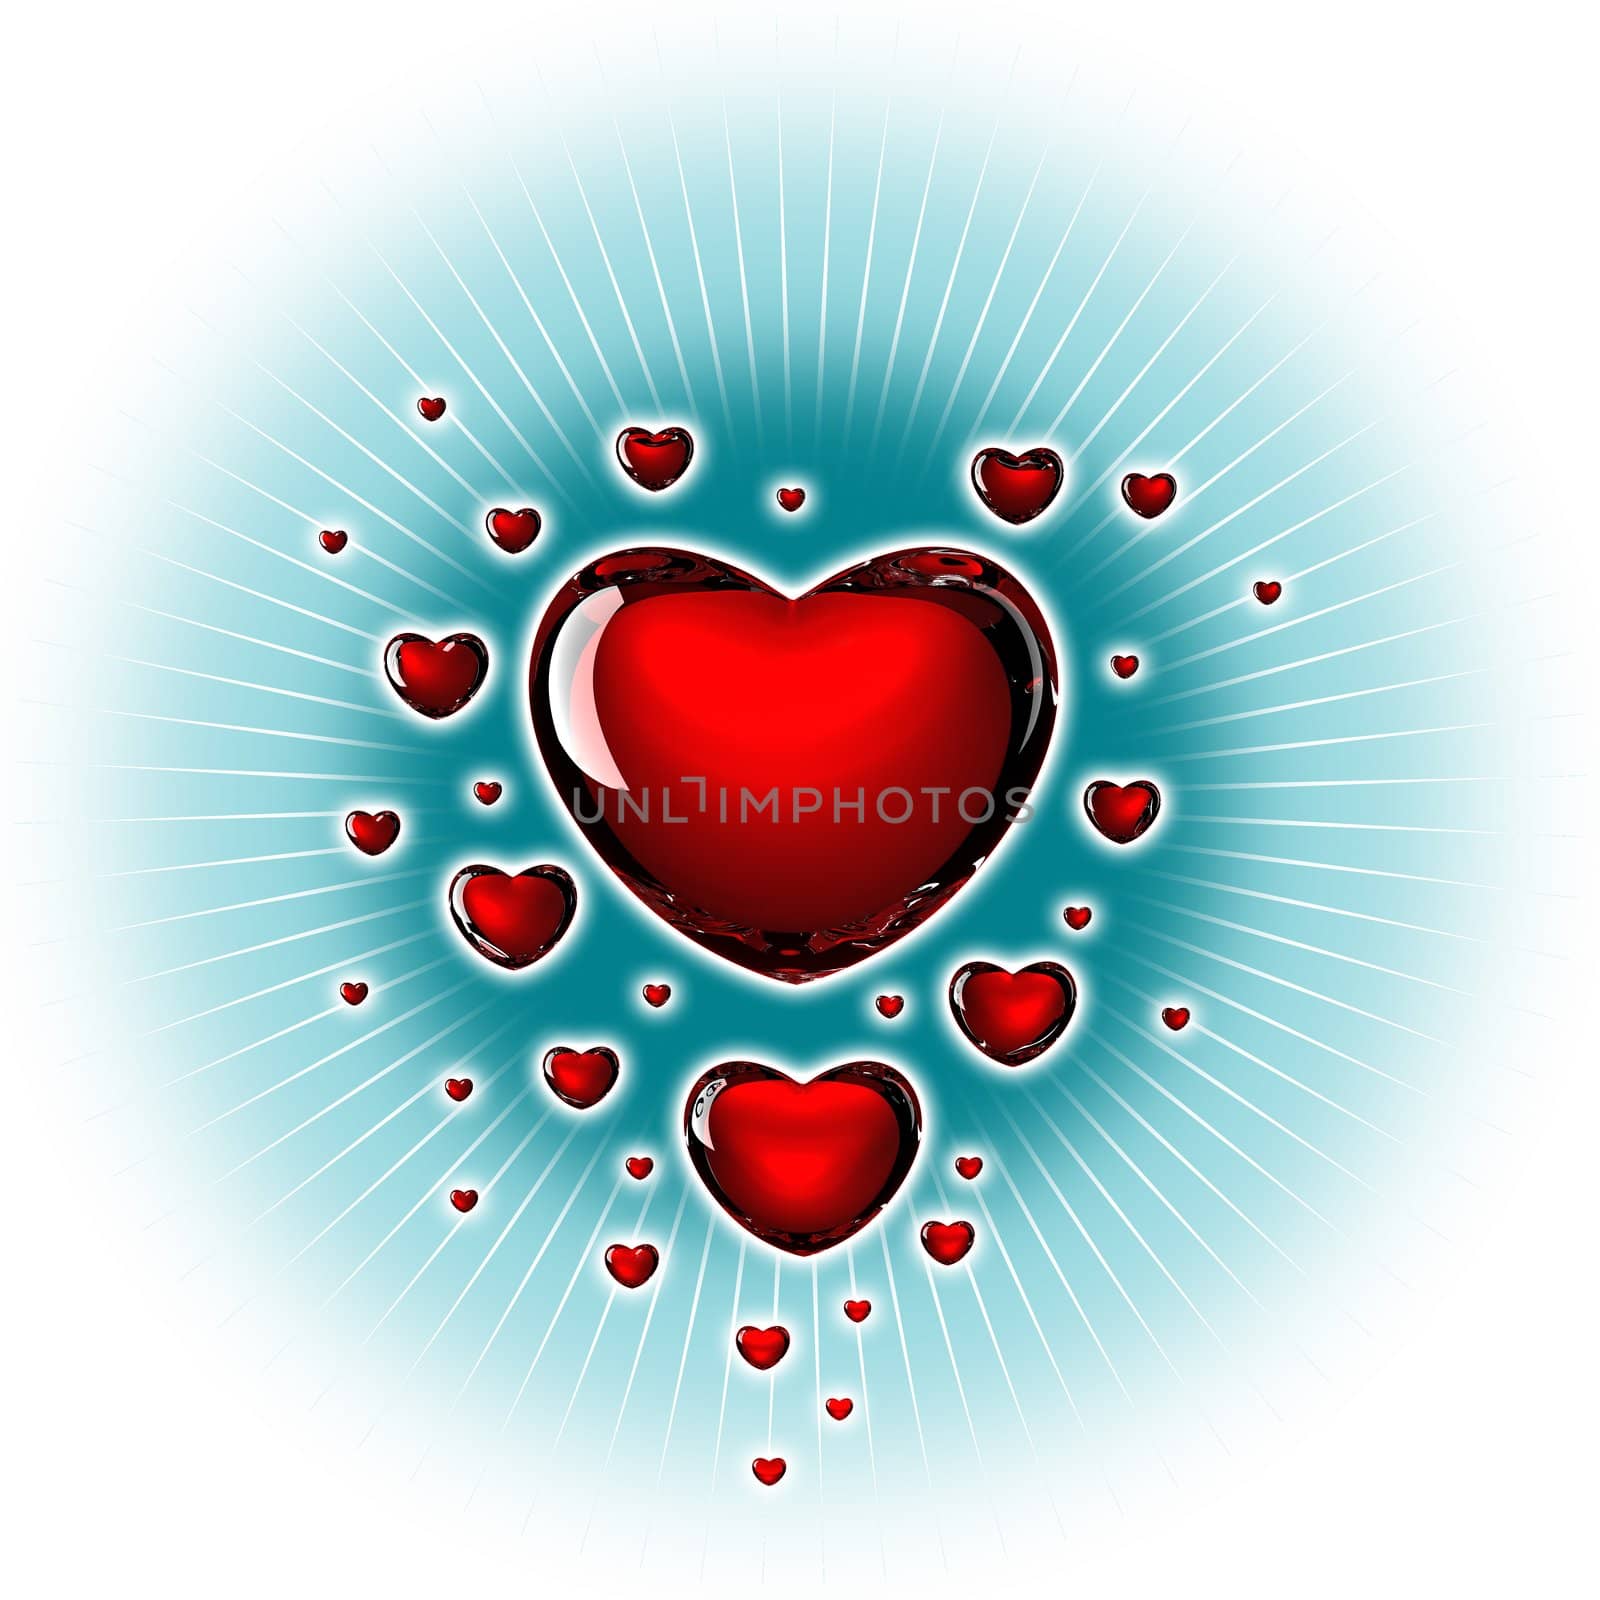 Background image of hearts